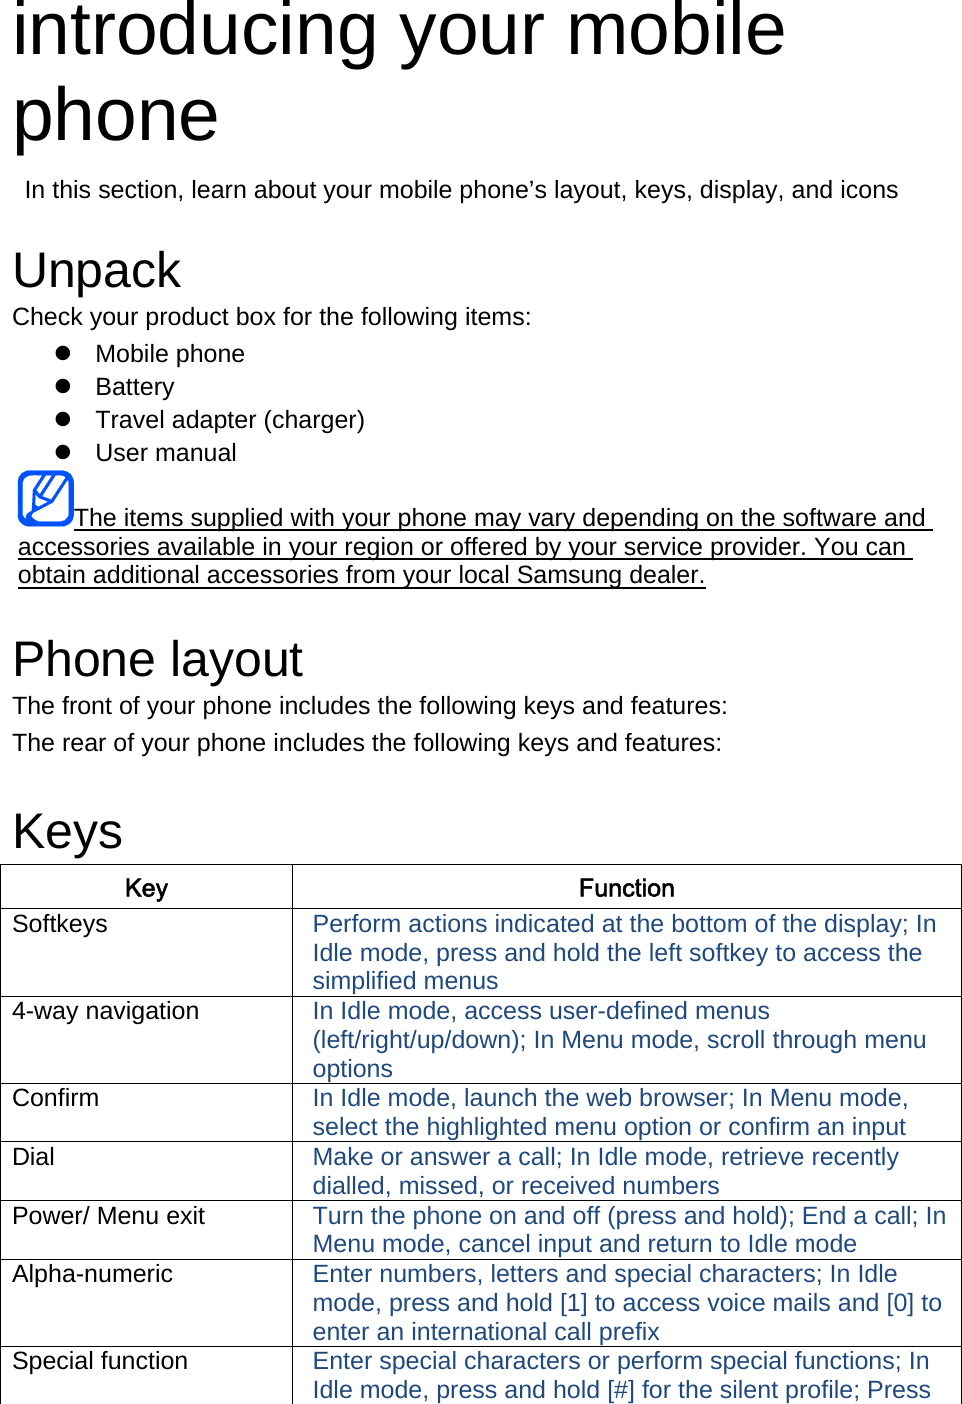 introducing your mobile phone   In this section, learn about your mobile phone’s layout, keys, display, and icons  Unpack Check your product box for the following items:  Mobile phone  Battery   Travel adapter (charger)  User manual The items supplied with your phone may vary depending on the software and accessories available in your region or offered by your service provider. You can obtain additional accessories from your local Samsung dealer.  Phone layout The front of your phone includes the following keys and features: The rear of your phone includes the following keys and features:  Keys Key  Function Softkeys  Perform actions indicated at the bottom of the display; In Idle mode, press and hold the left softkey to access the simplified menus 4-way navigation  In Idle mode, access user-defined menus (left/right/up/down); In Menu mode, scroll through menu options Confirm  In Idle mode, launch the web browser; In Menu mode, select the highlighted menu option or confirm an input Dial  Make or answer a call; In Idle mode, retrieve recently dialled, missed, or received numbers Power/ Menu exit  Turn the phone on and off (press and hold); End a call; In Menu mode, cancel input and return to Idle mode Alpha-numeric  Enter numbers, letters and special characters; In Idle mode, press and hold [1] to access voice mails and [0] to enter an international call prefix Special function  Enter special characters or perform special functions; In Idle mode, press and hold [#] for the silent profile; Press 